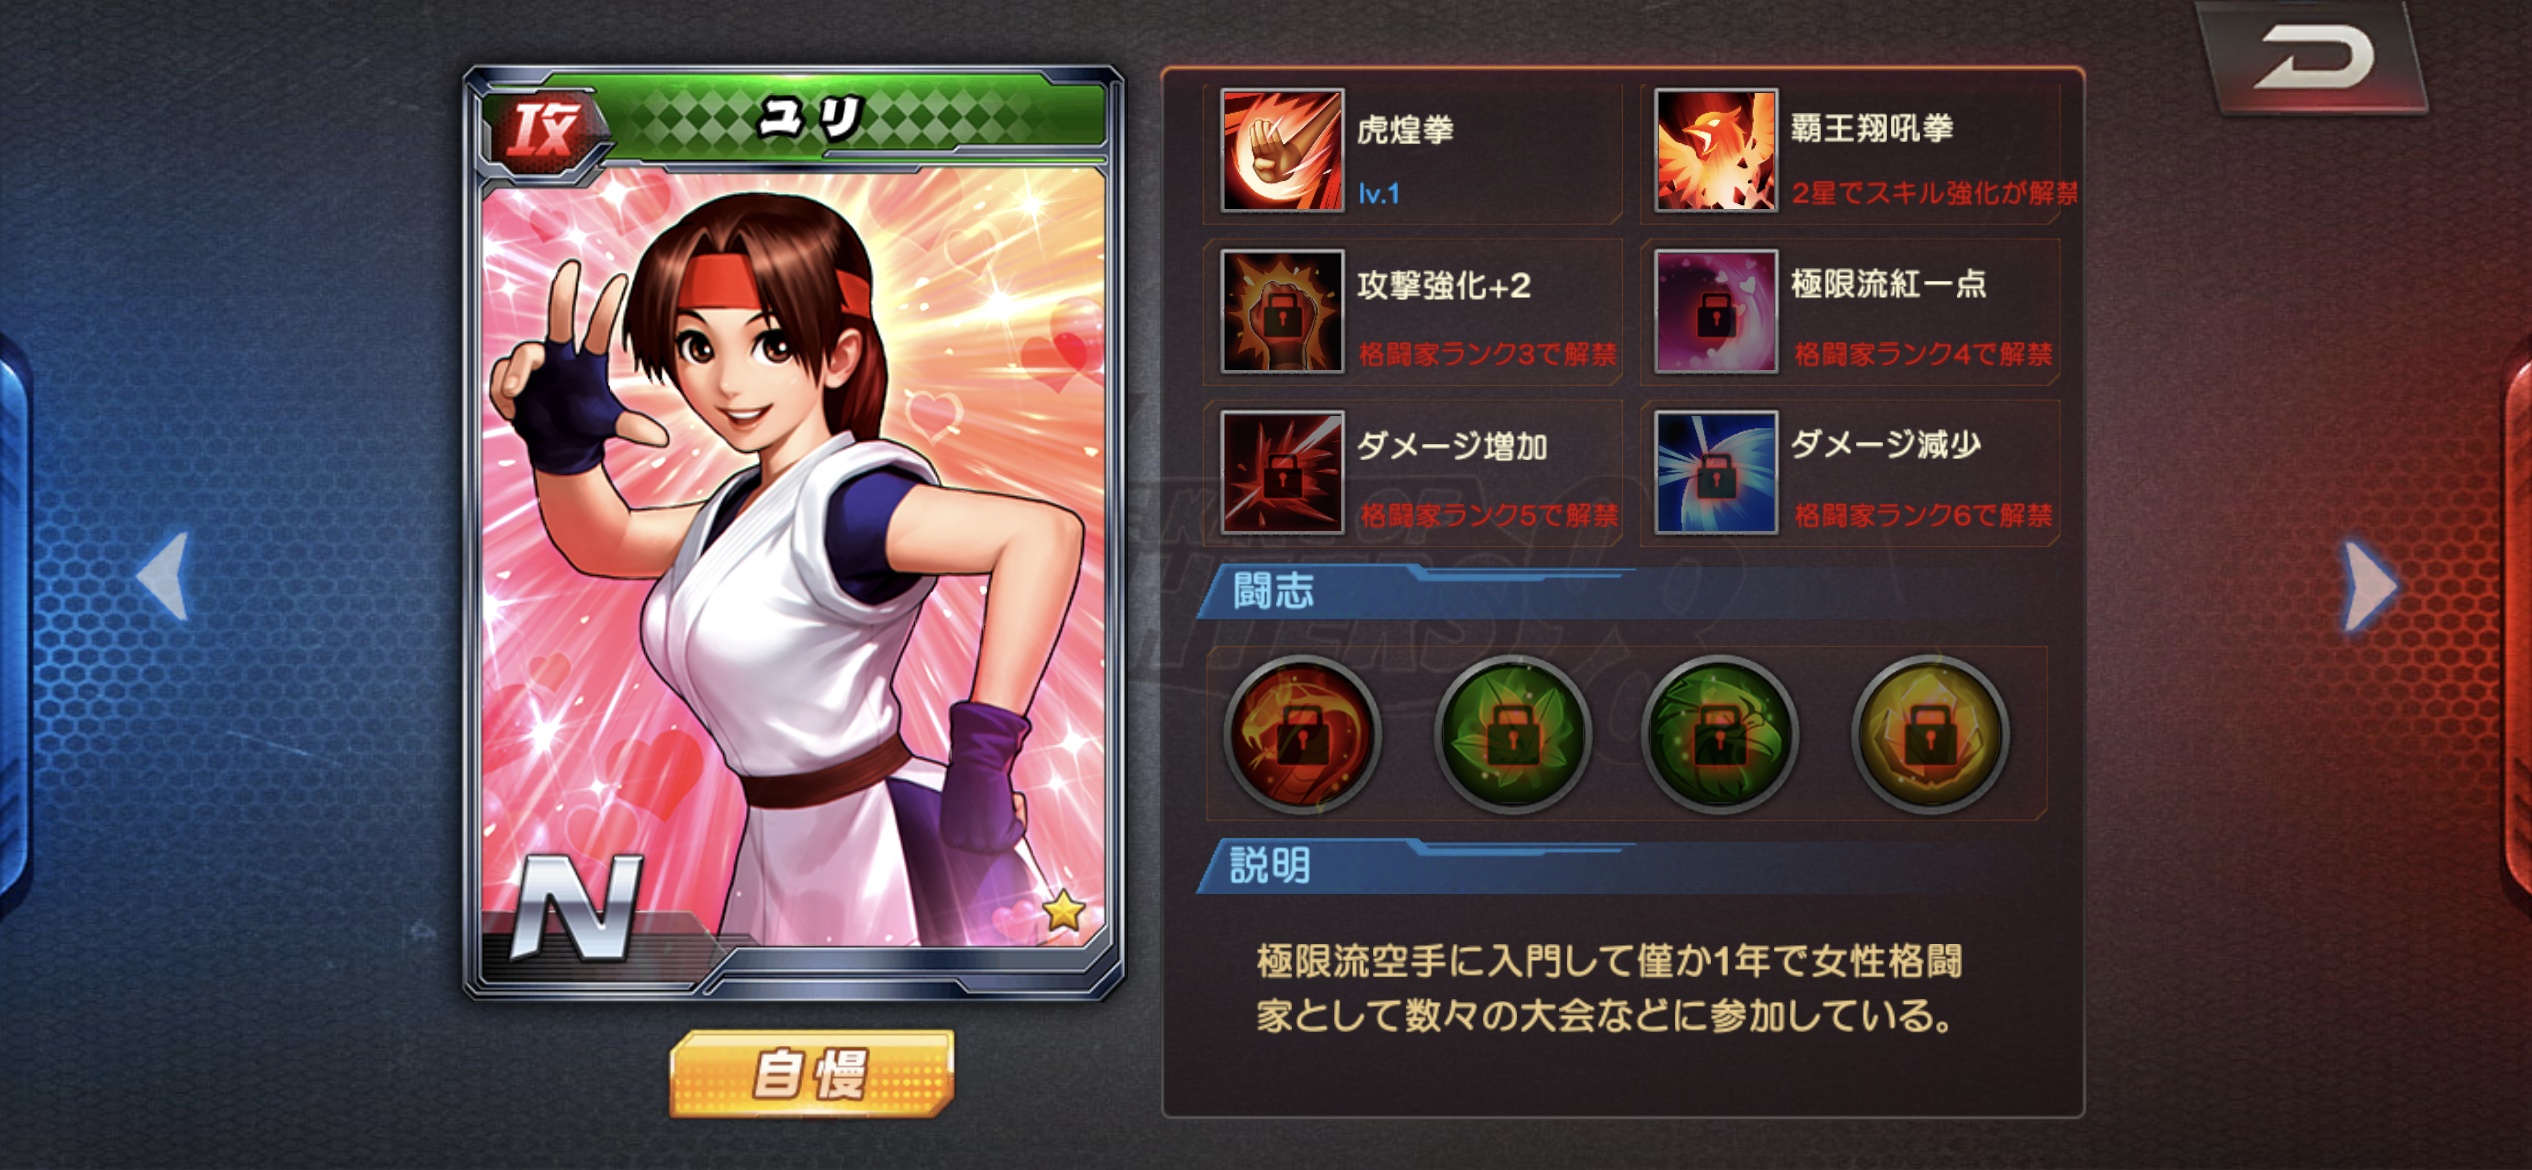 『THE KING OF FIGHTERS '98 UM OL』のレビュー：まとめ